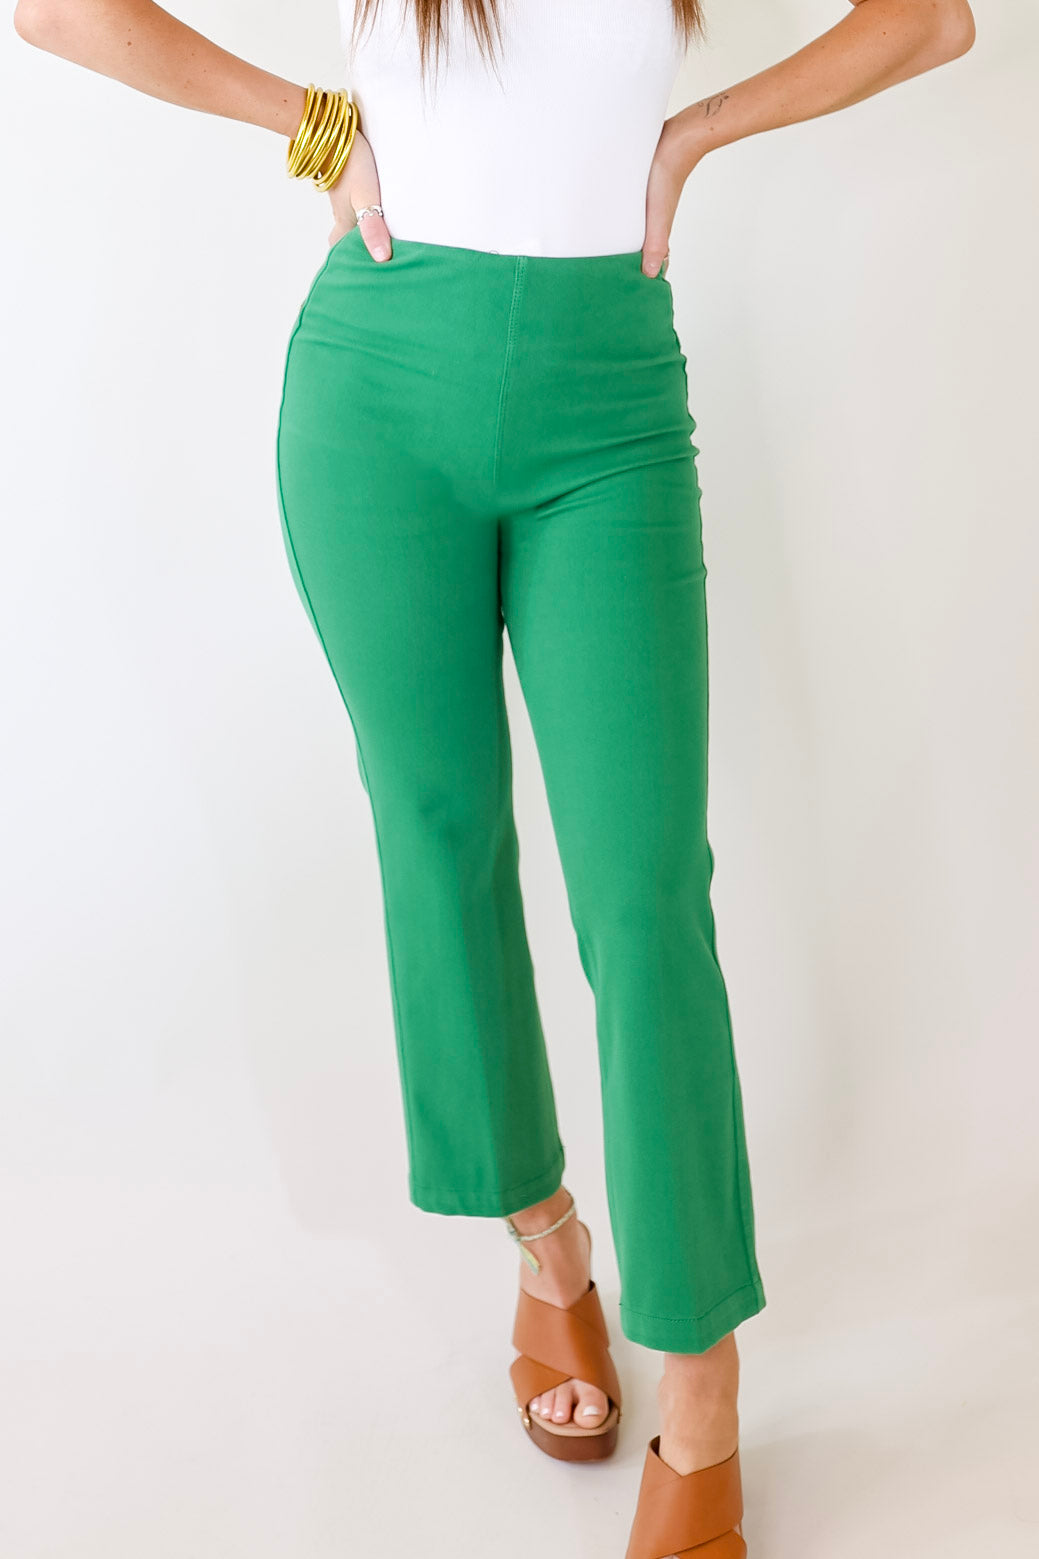 Lyssé | Denim Baby Bootcut Ankle Pants in Lily Pad Green - Giddy Up Glamour Boutique